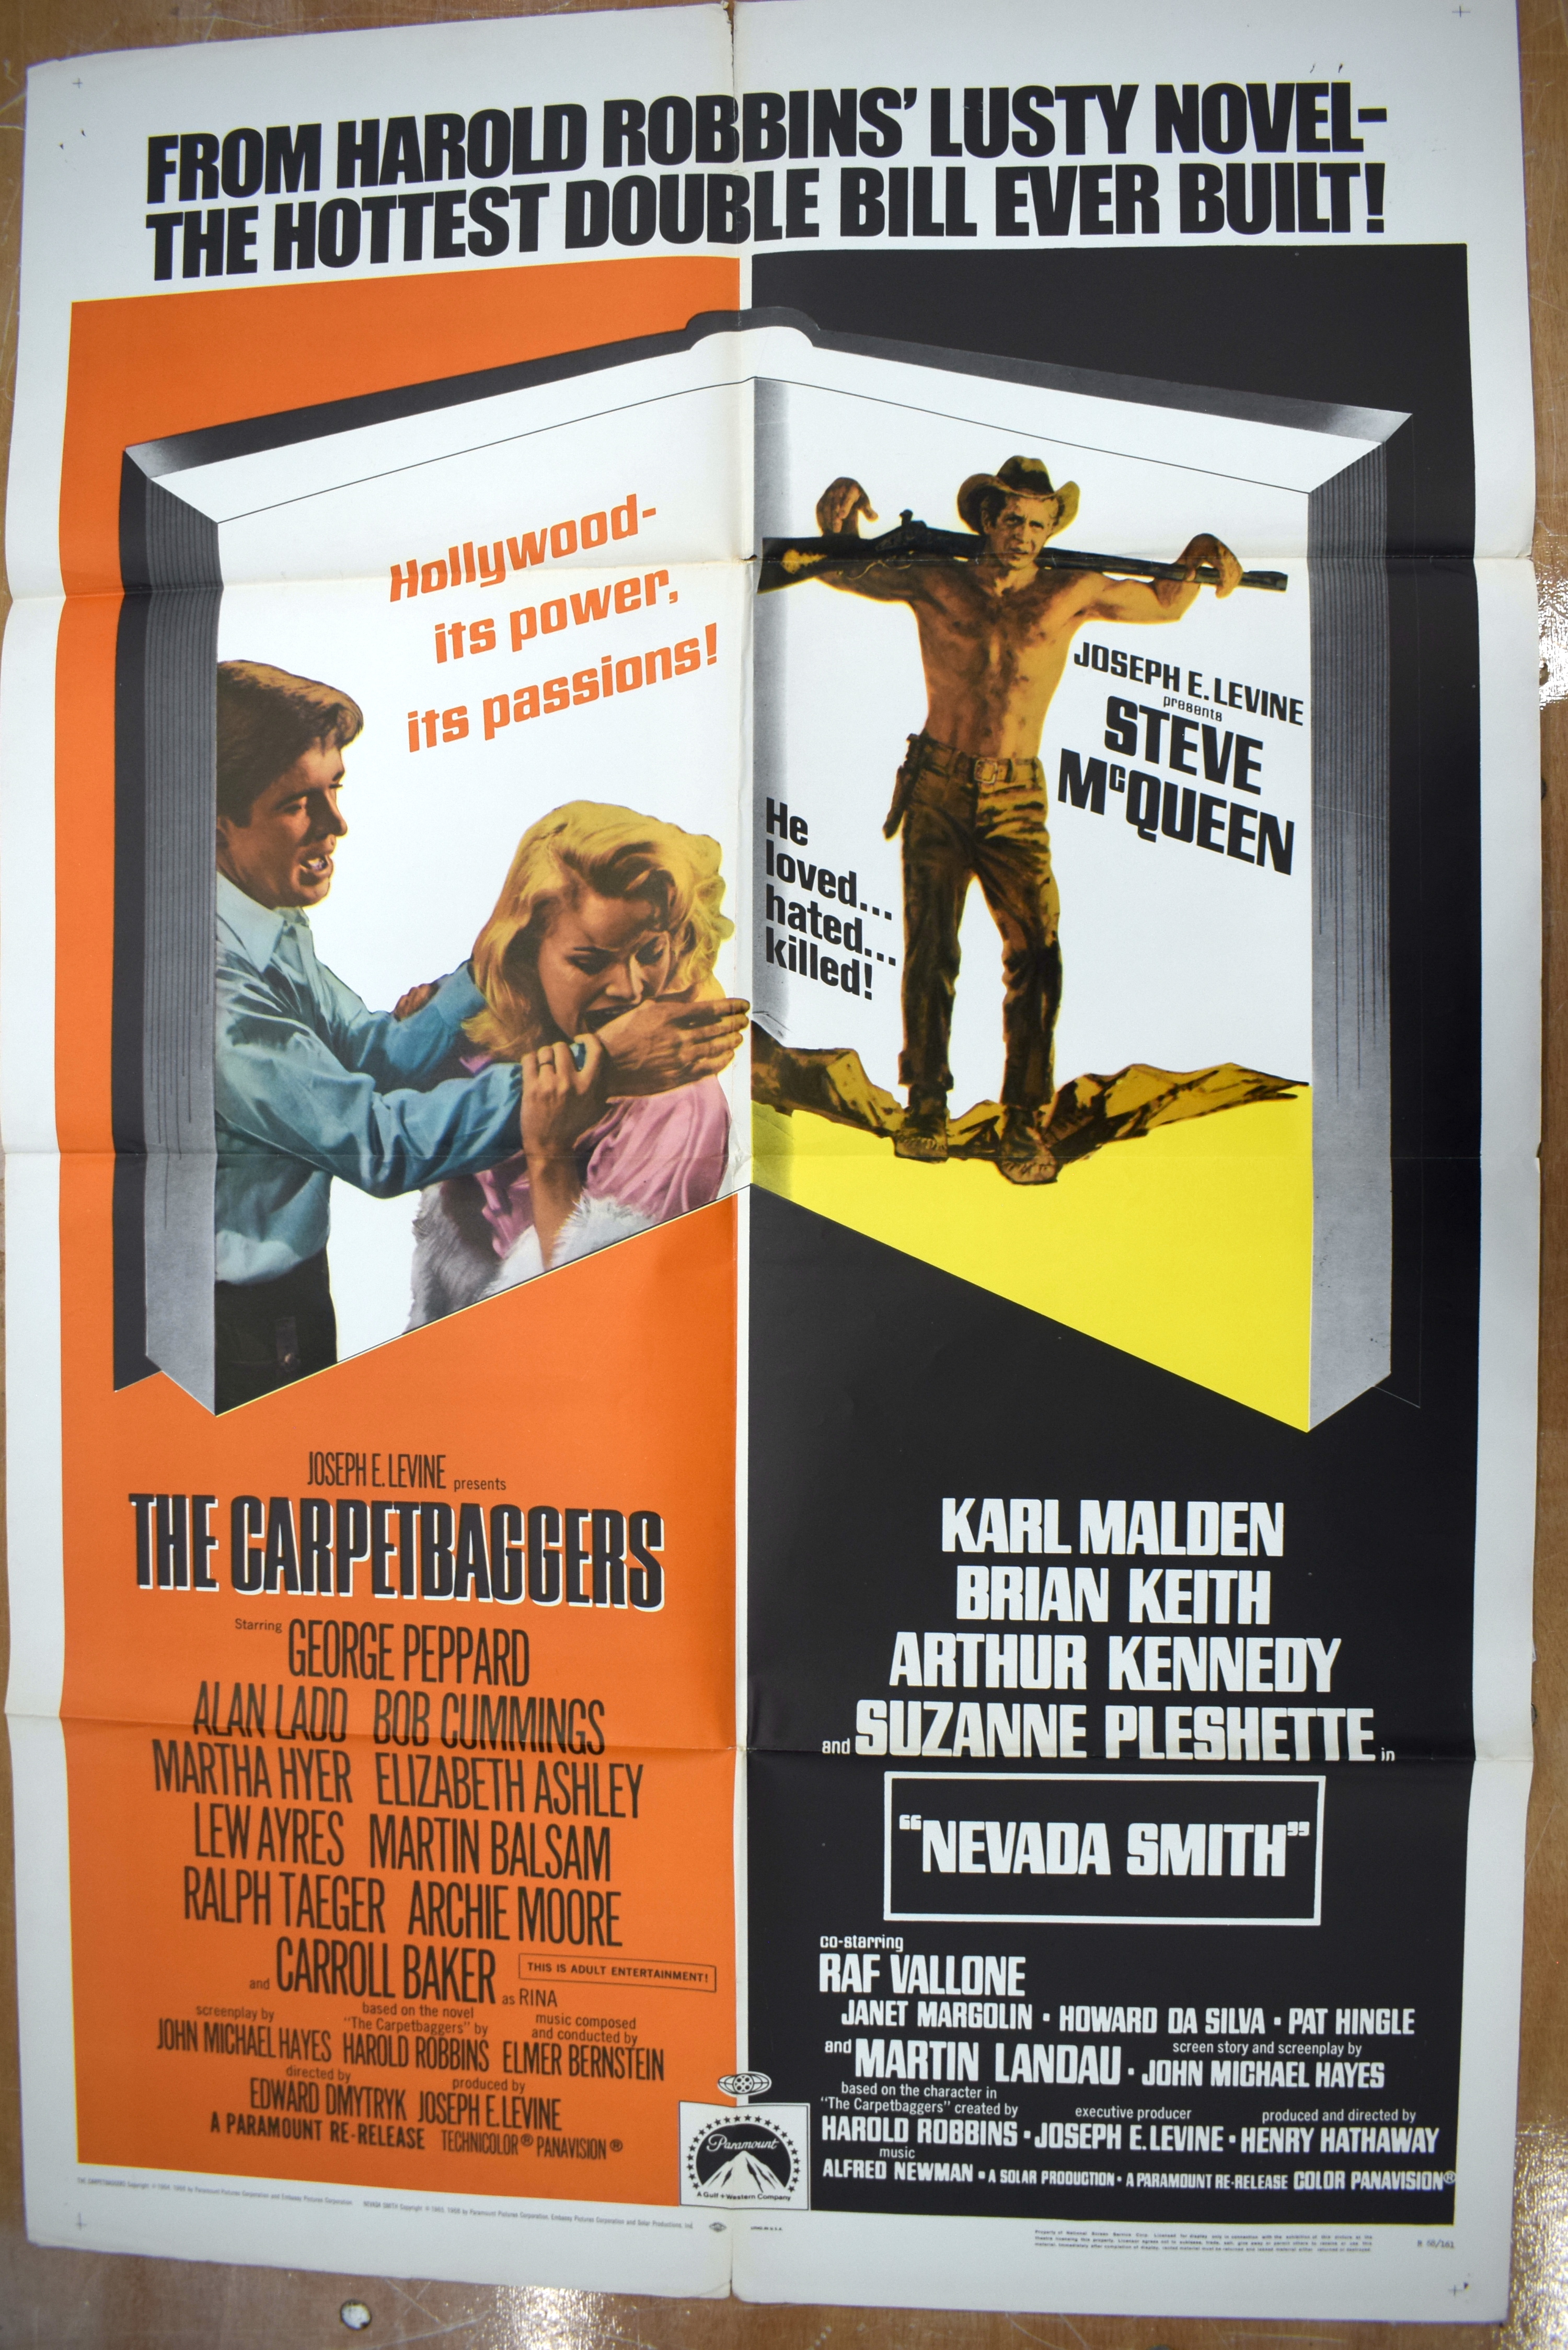 THE TURNING POINT movie poster, 1952, horizontal and vertical folds, torn at folds, stained, 105 cm - Image 5 of 5